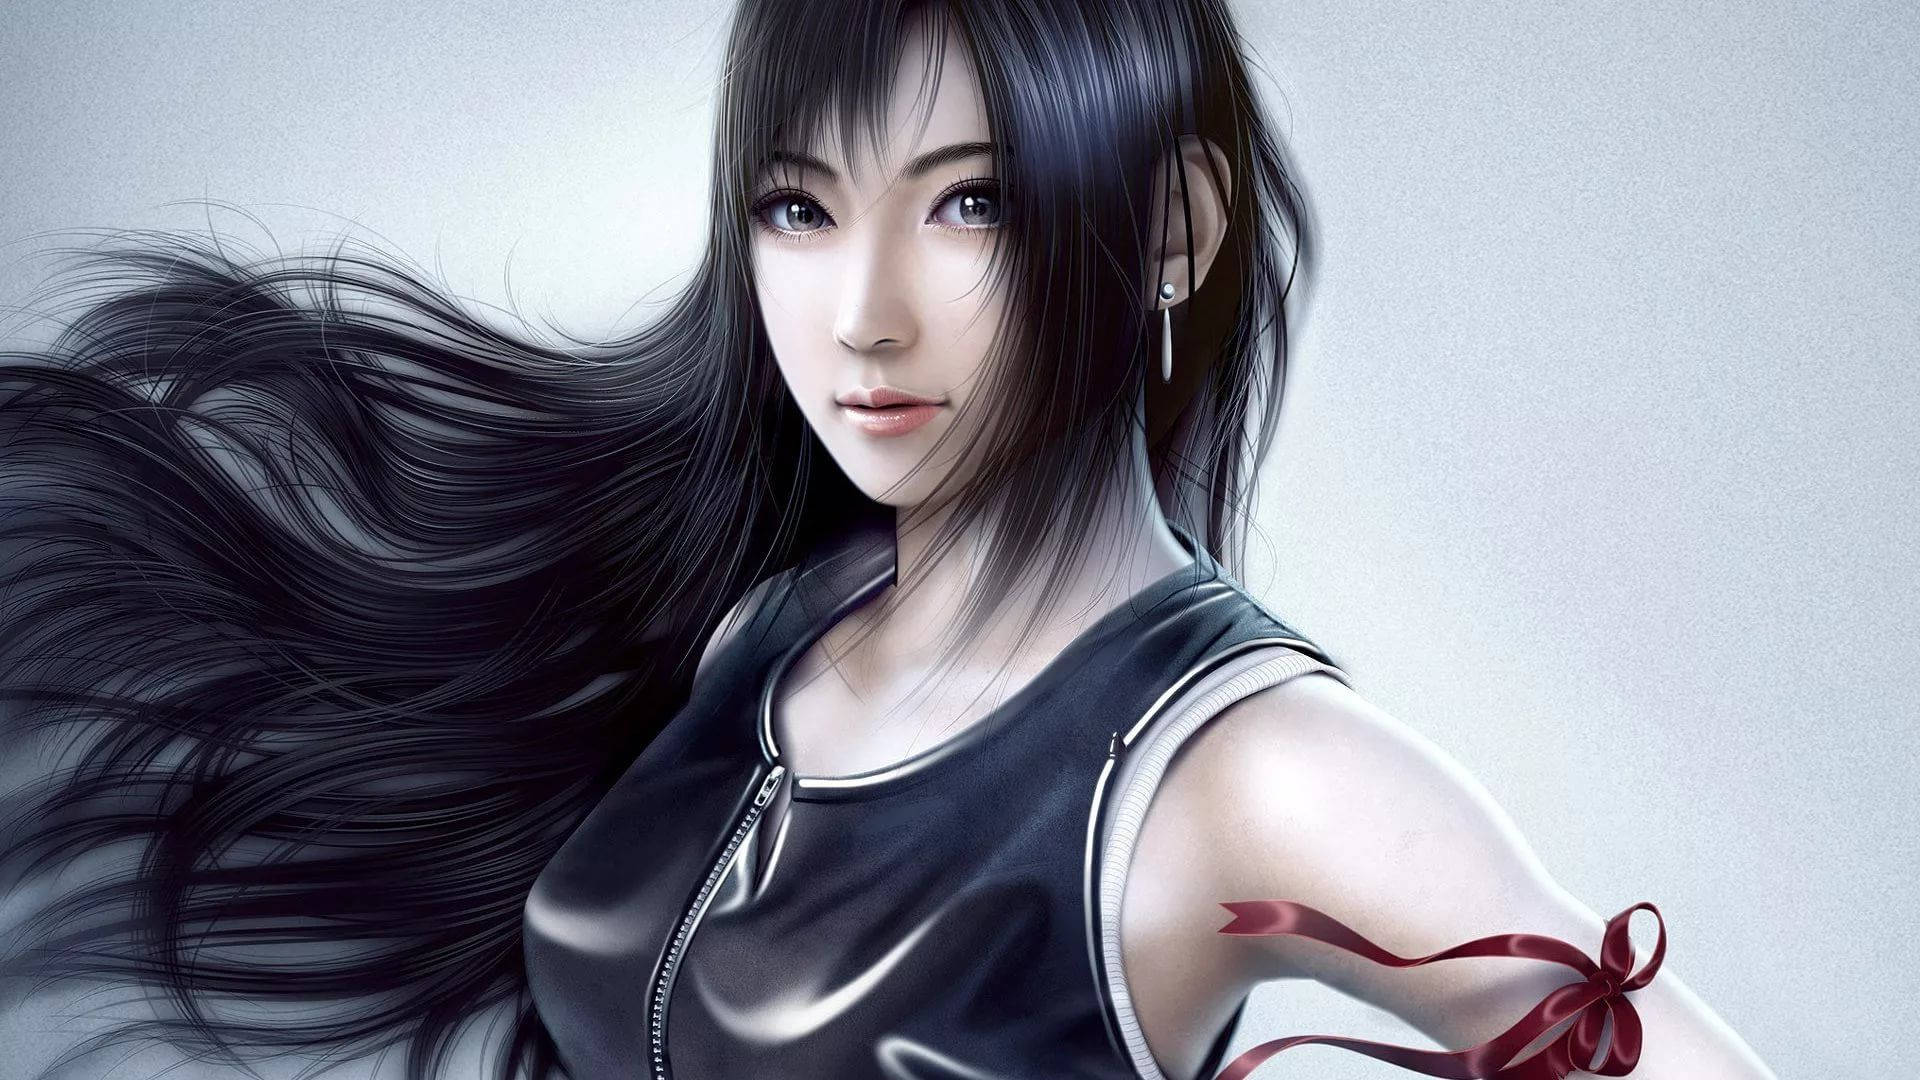 a girl with long black hair is holding a red ribbon Wallpaper